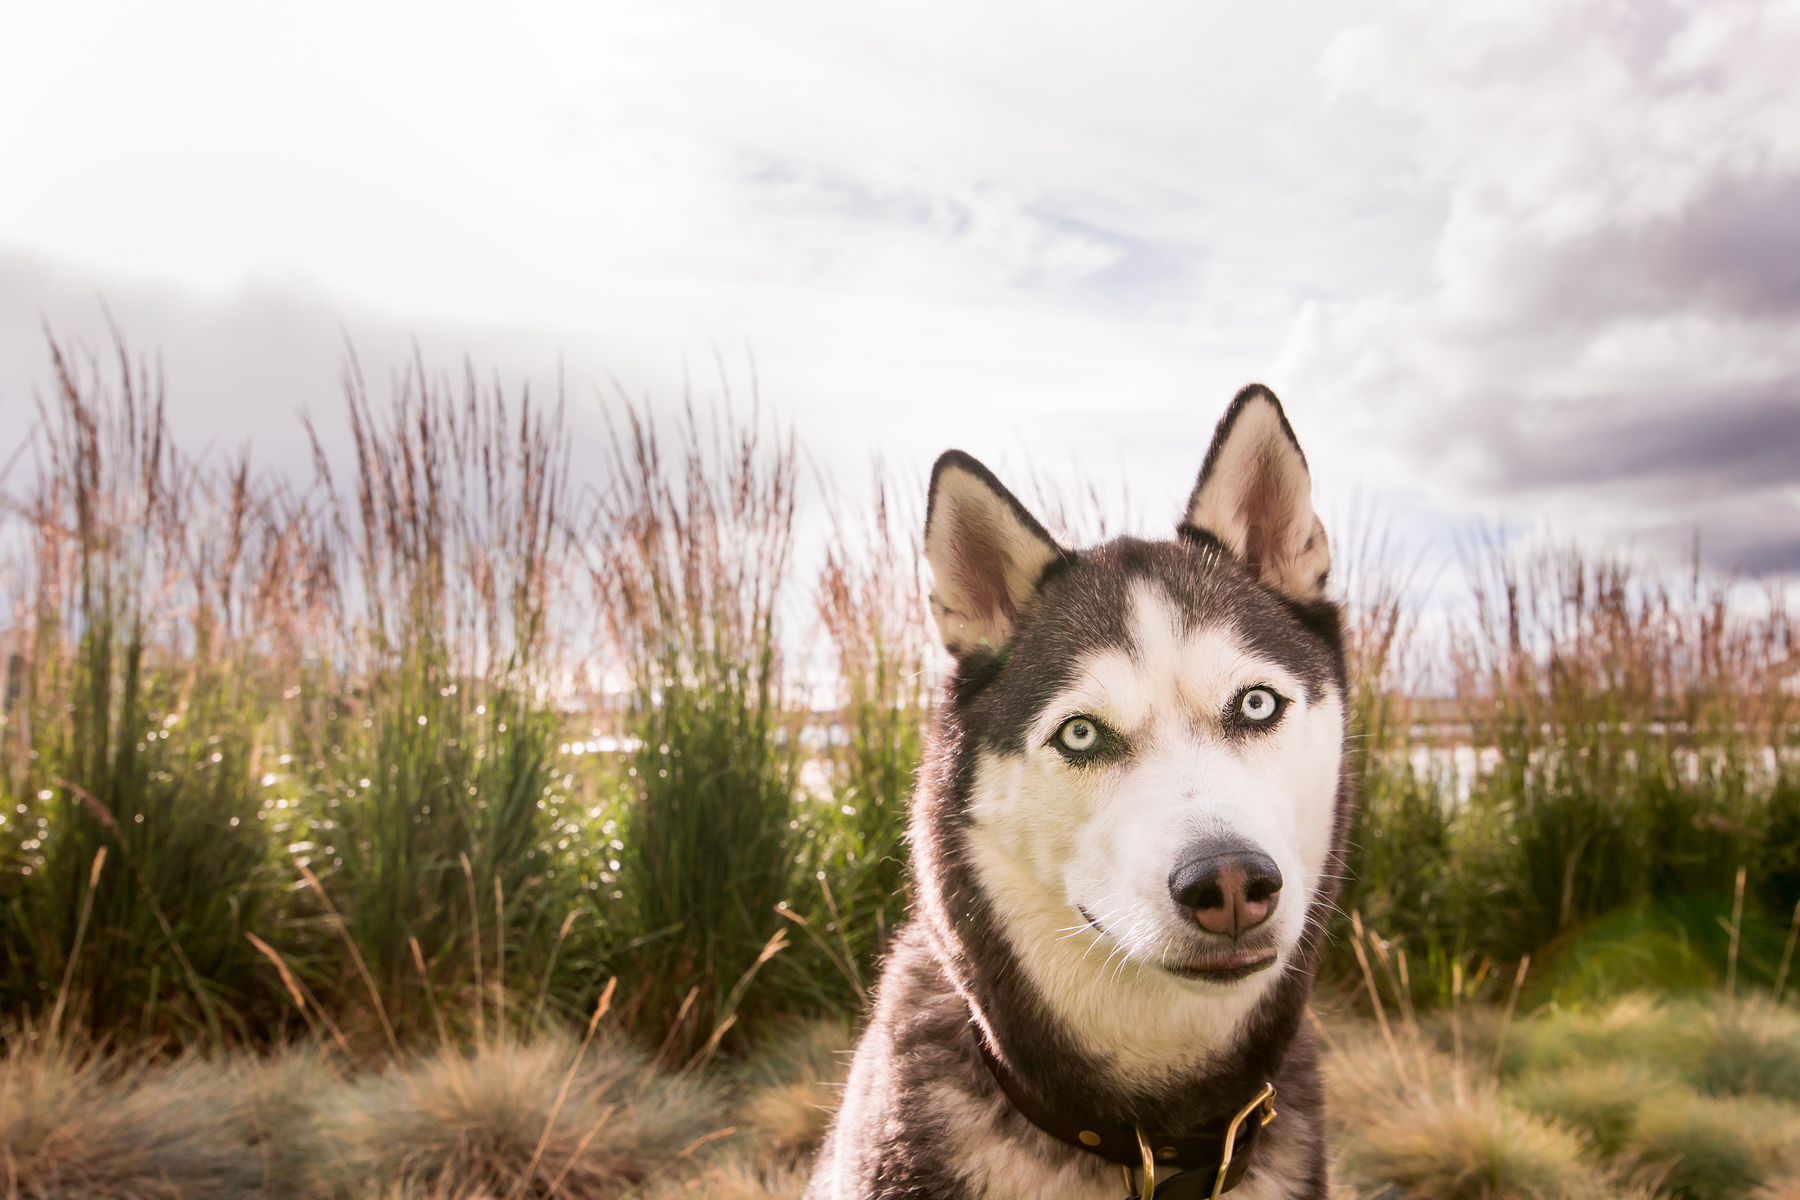 Husky sitting in front of tall grass.